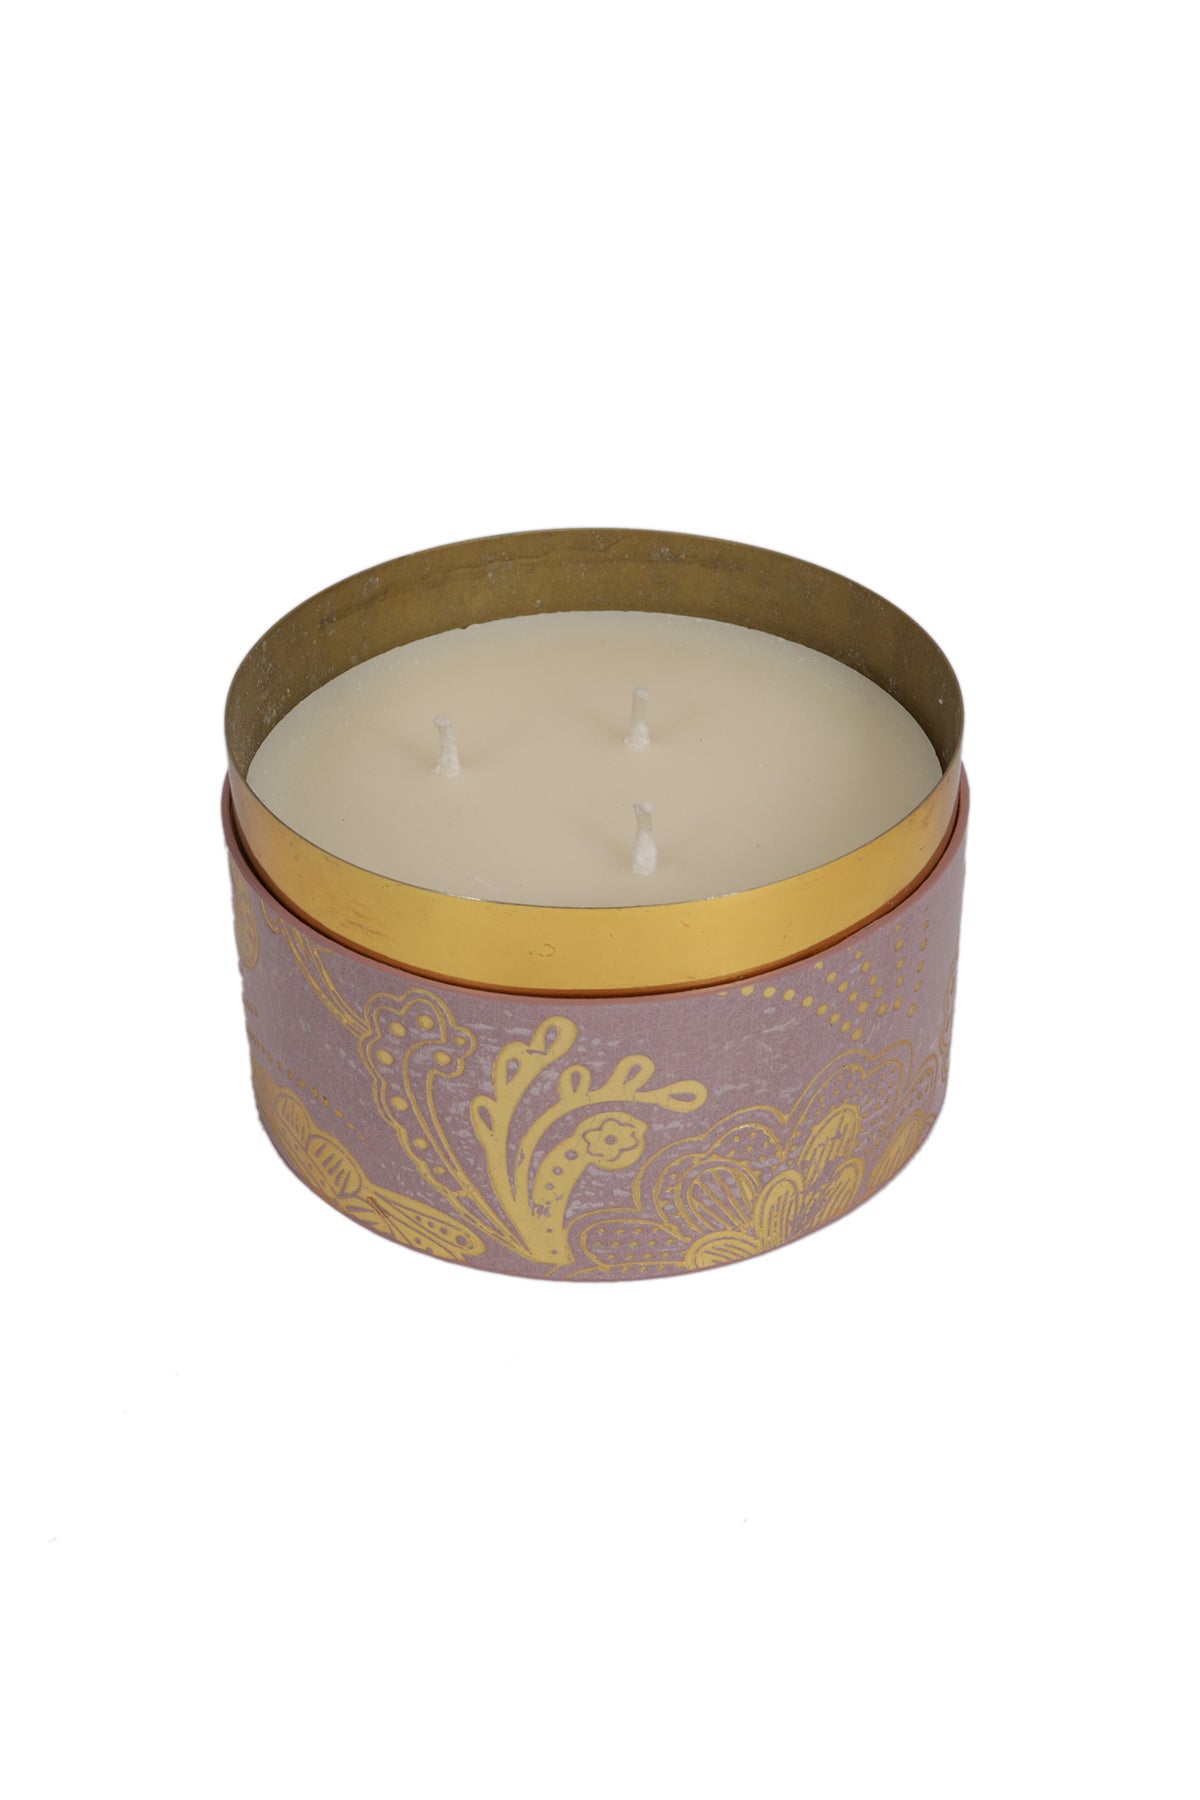 Jasmine & Oud Candle (3 wick) - Lilac